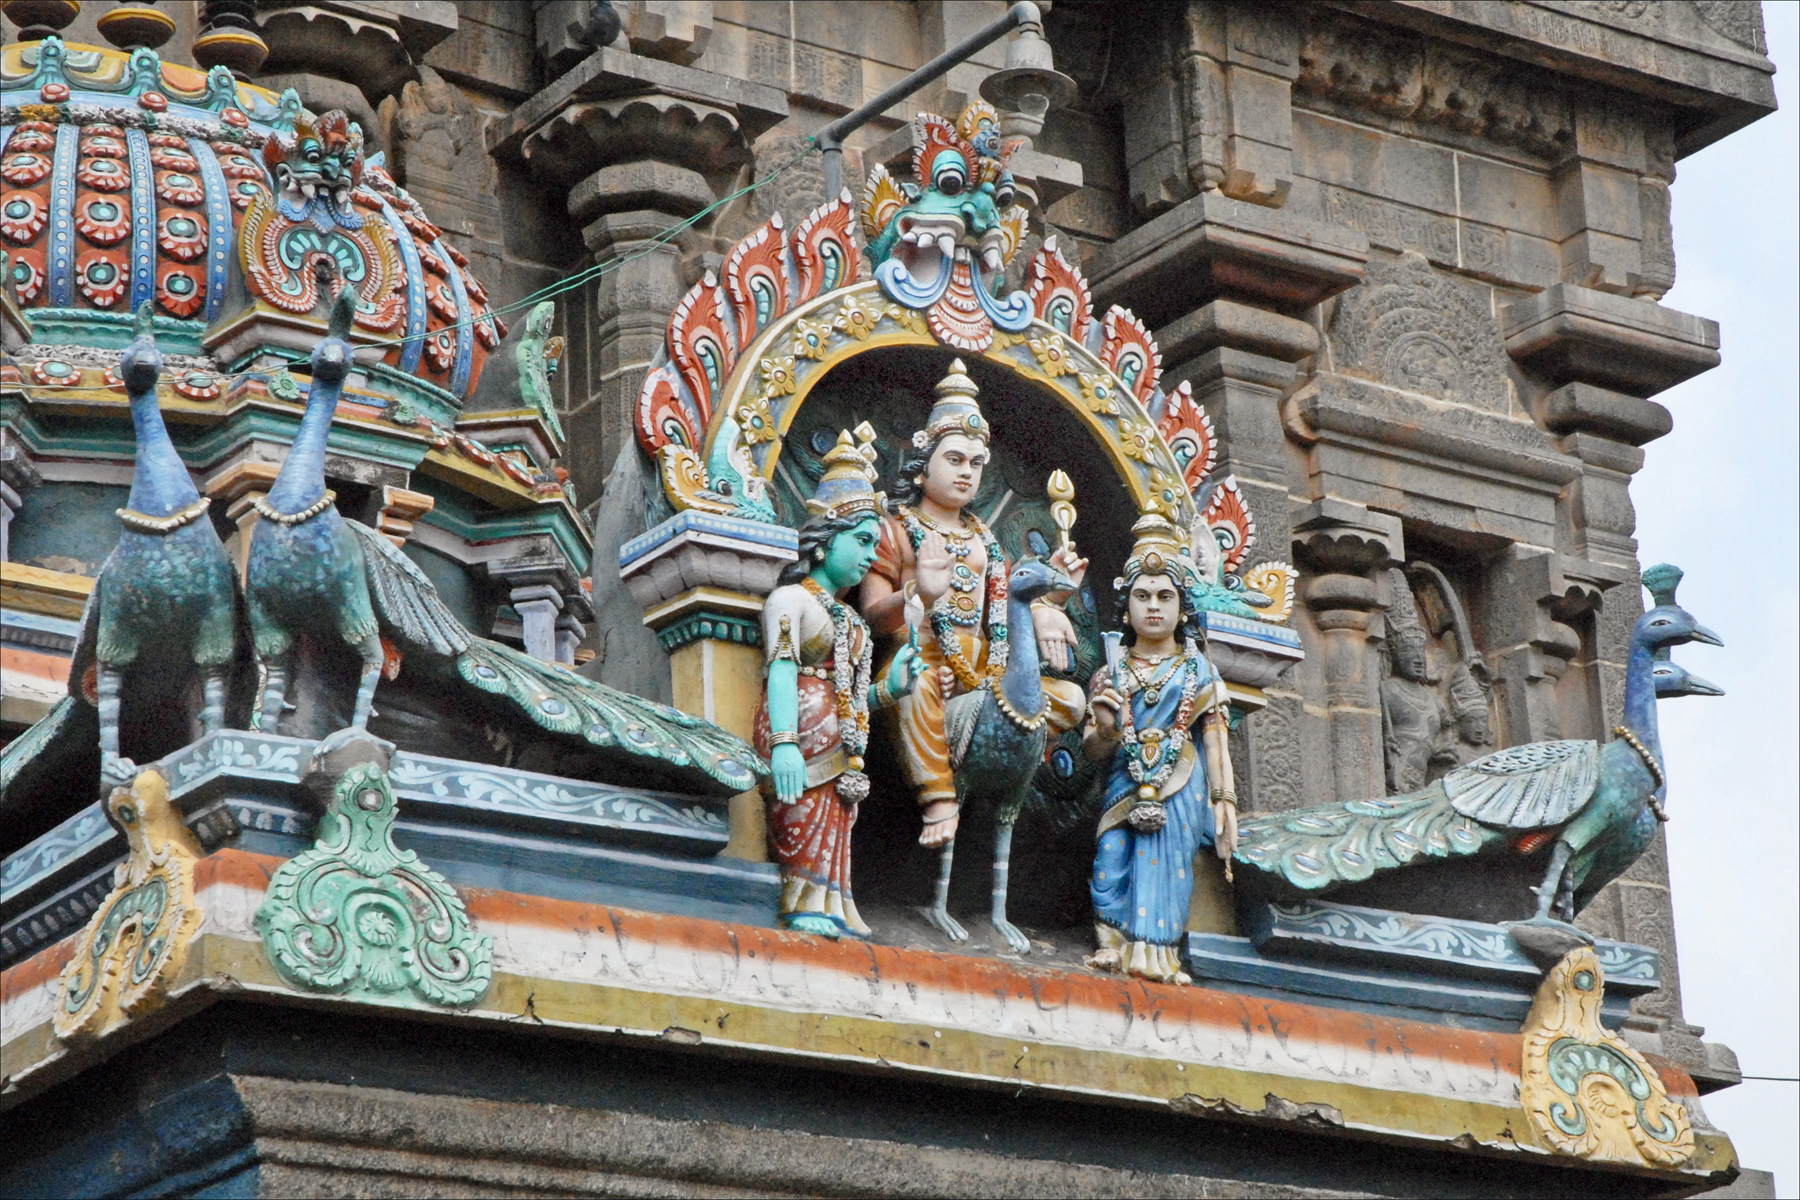 the carvings in the structure are of various deities